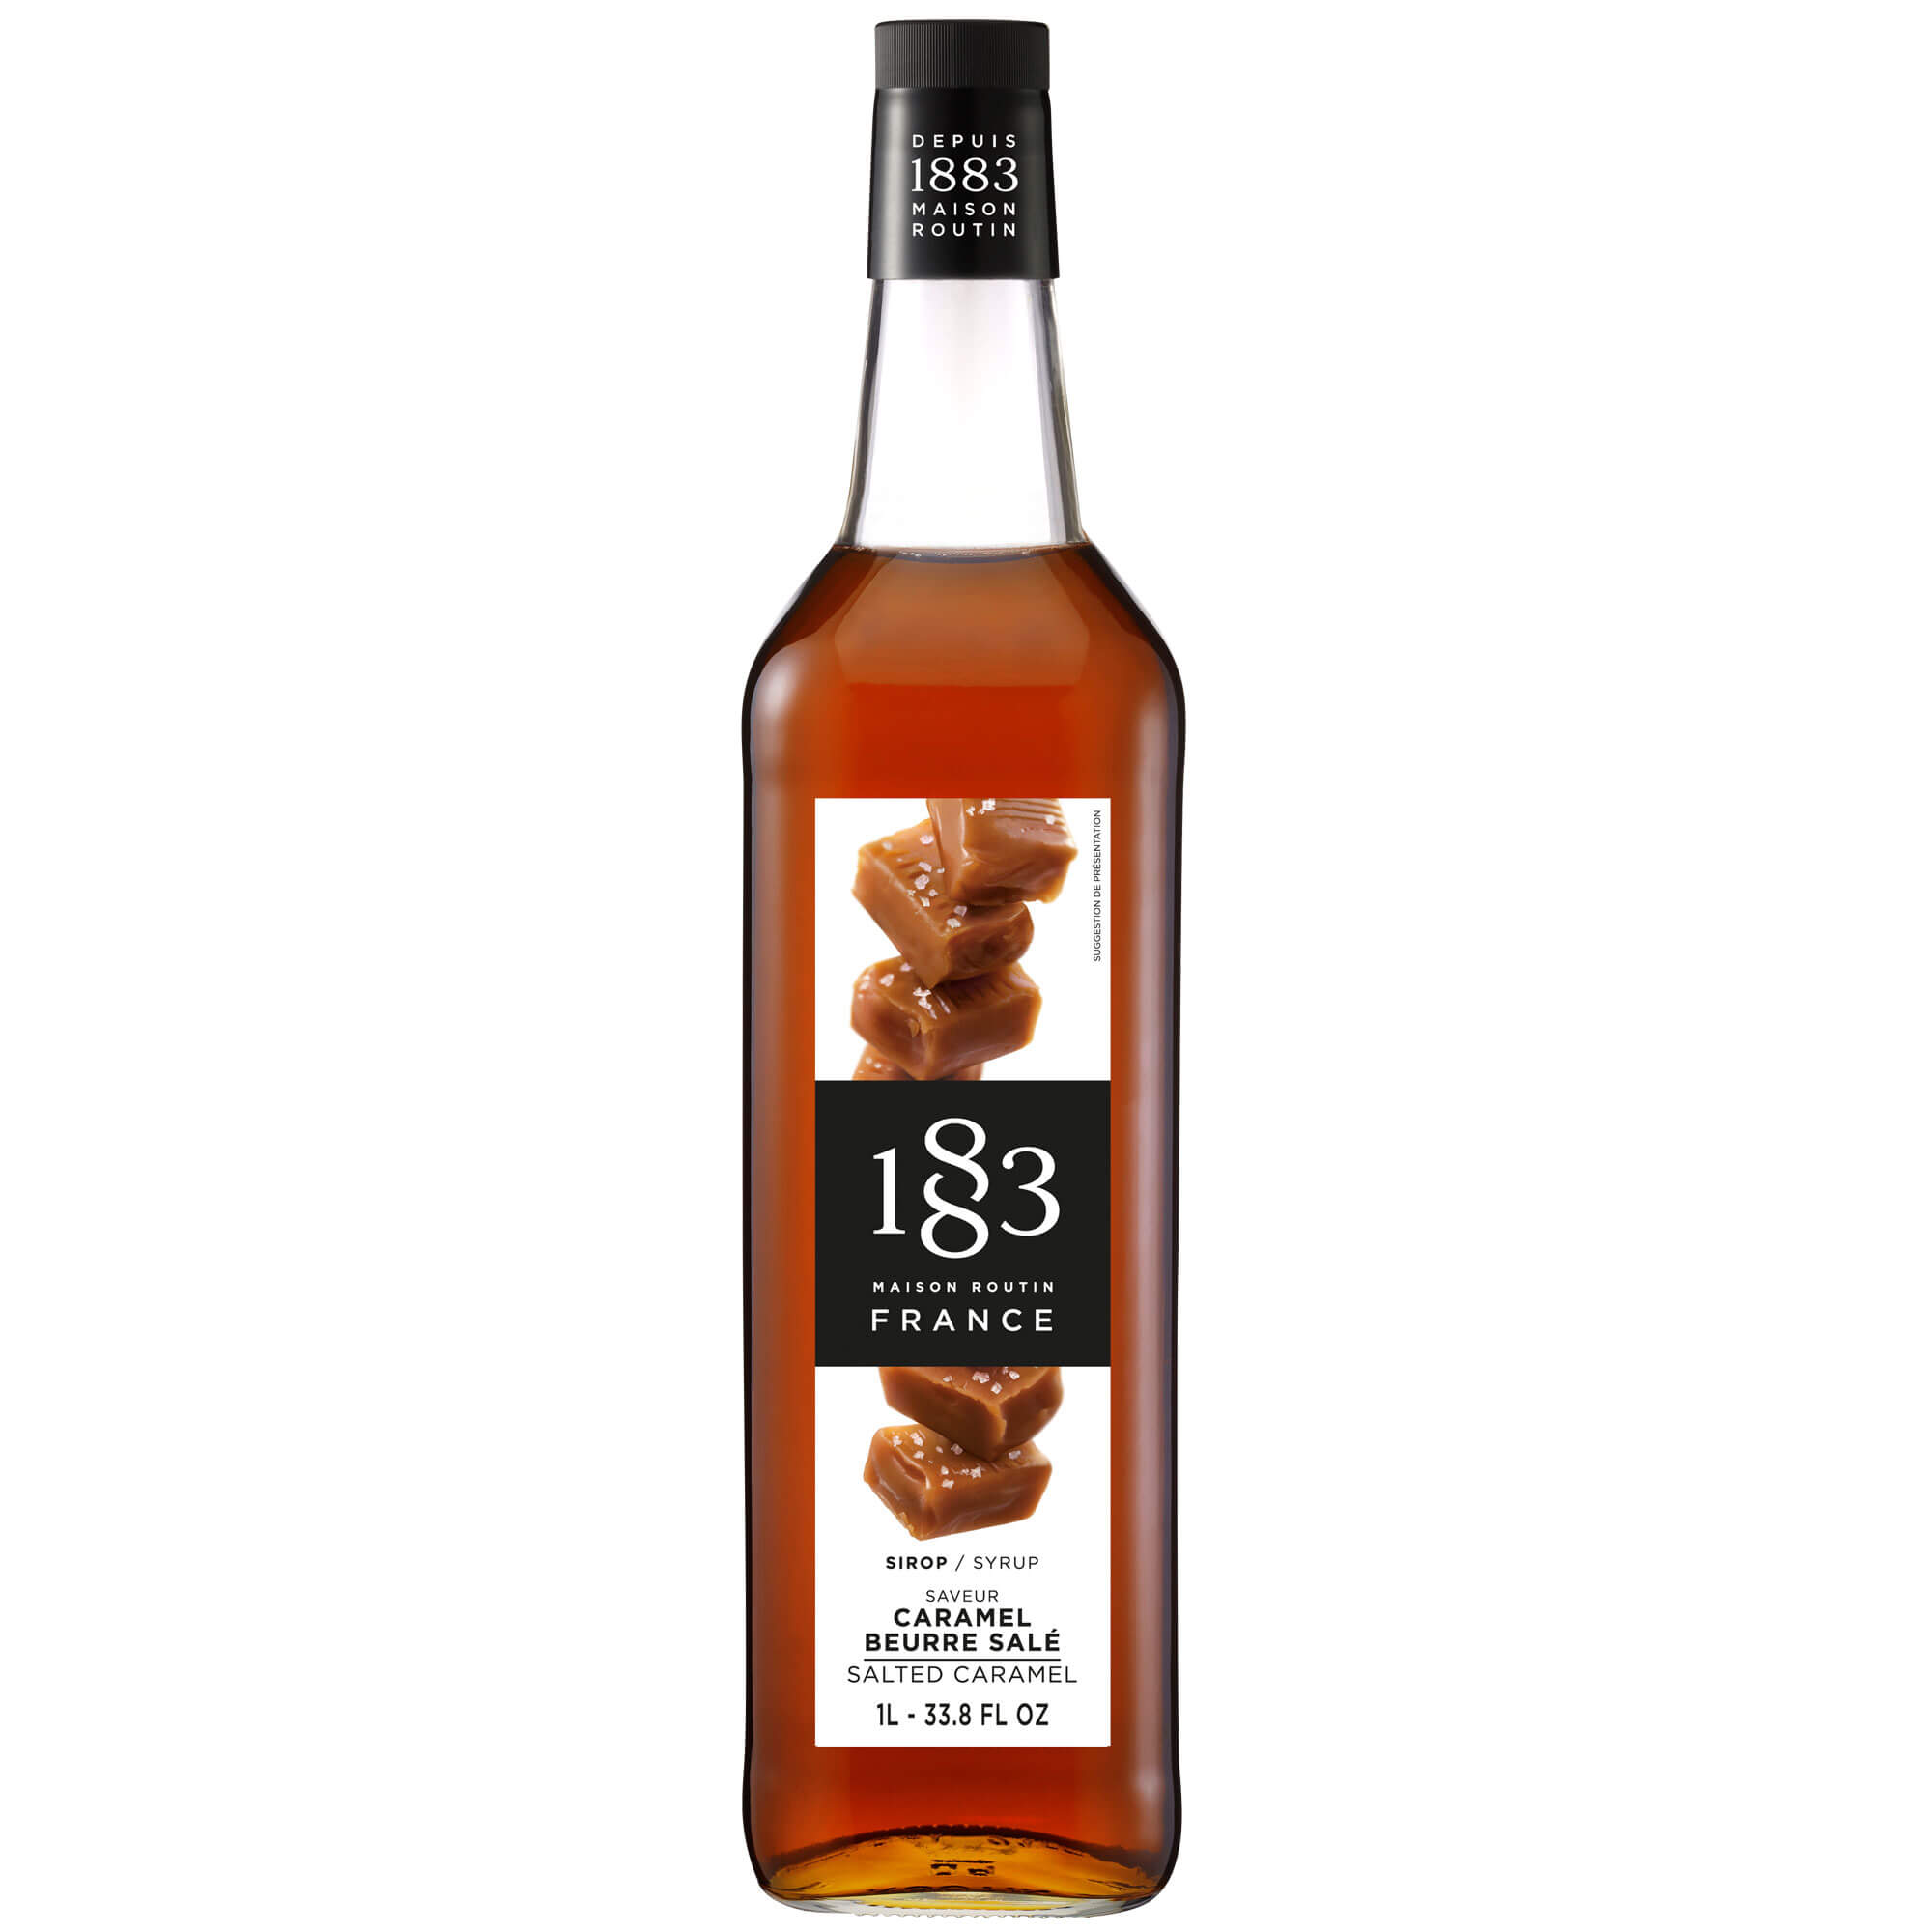 Salty Caramel - Maison Routin 1883 syrup (1,0l)